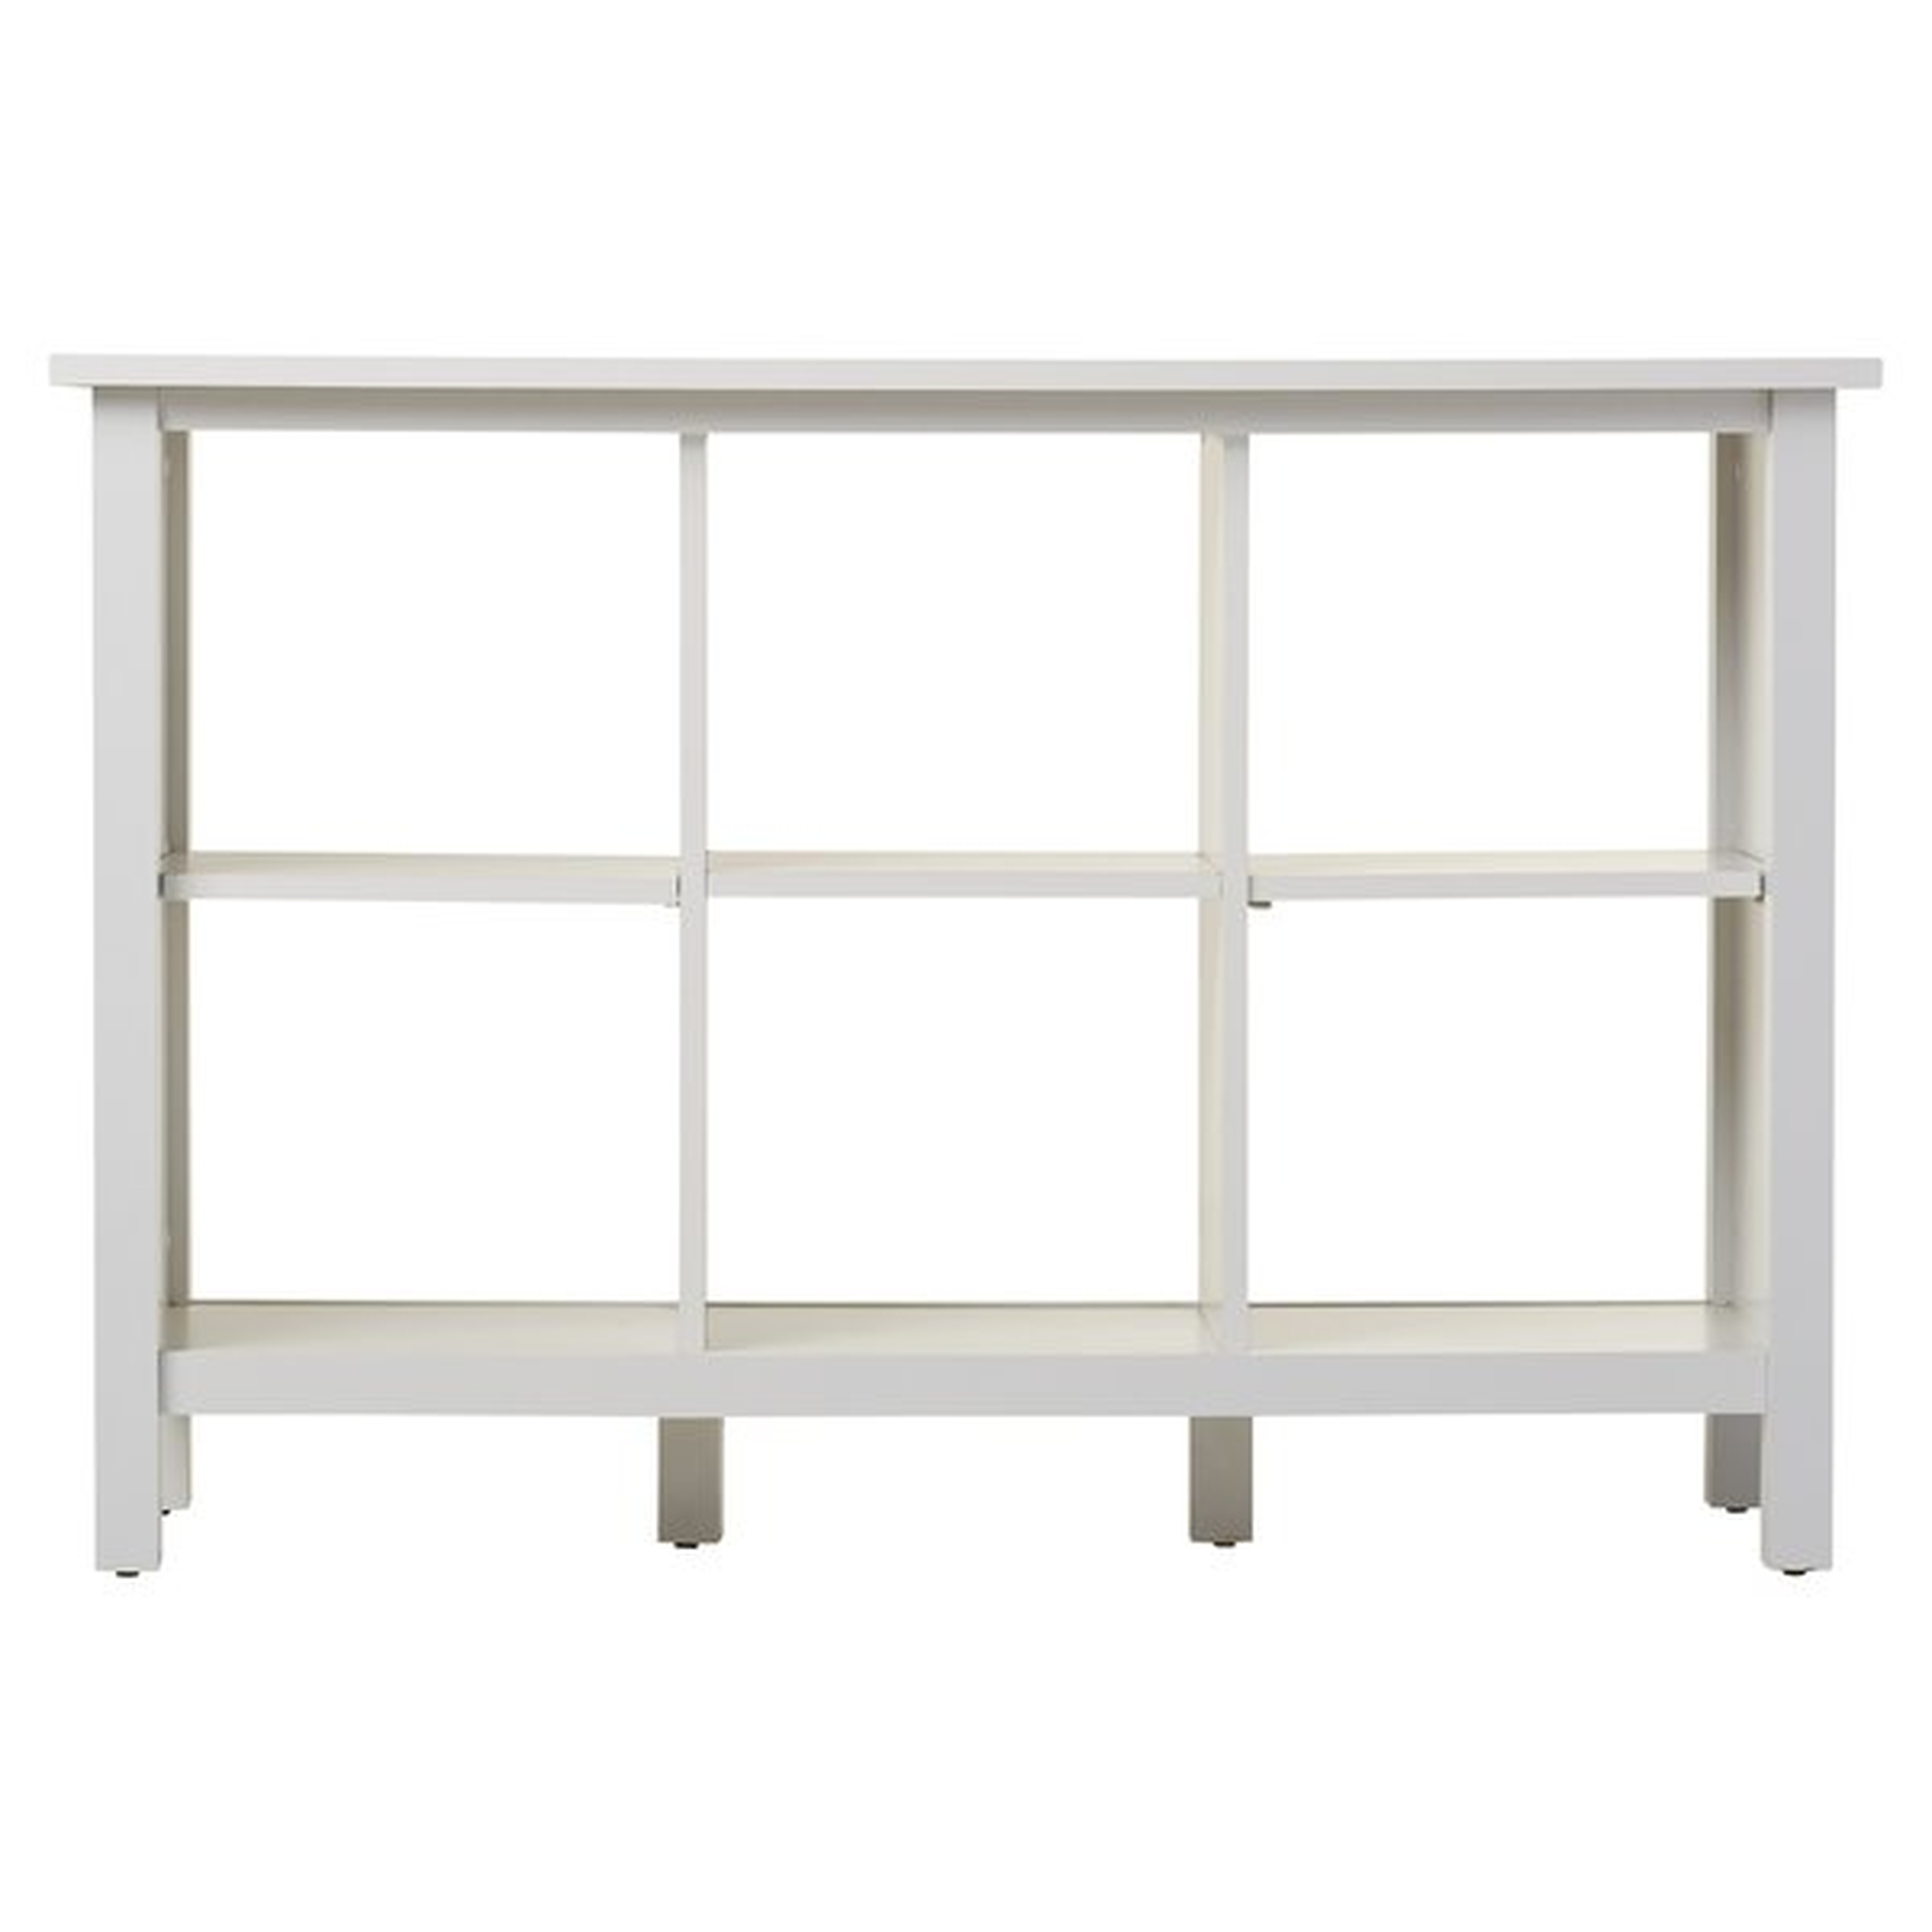 Broadview Cube Unit Bookcase in Antique White - Wayfair